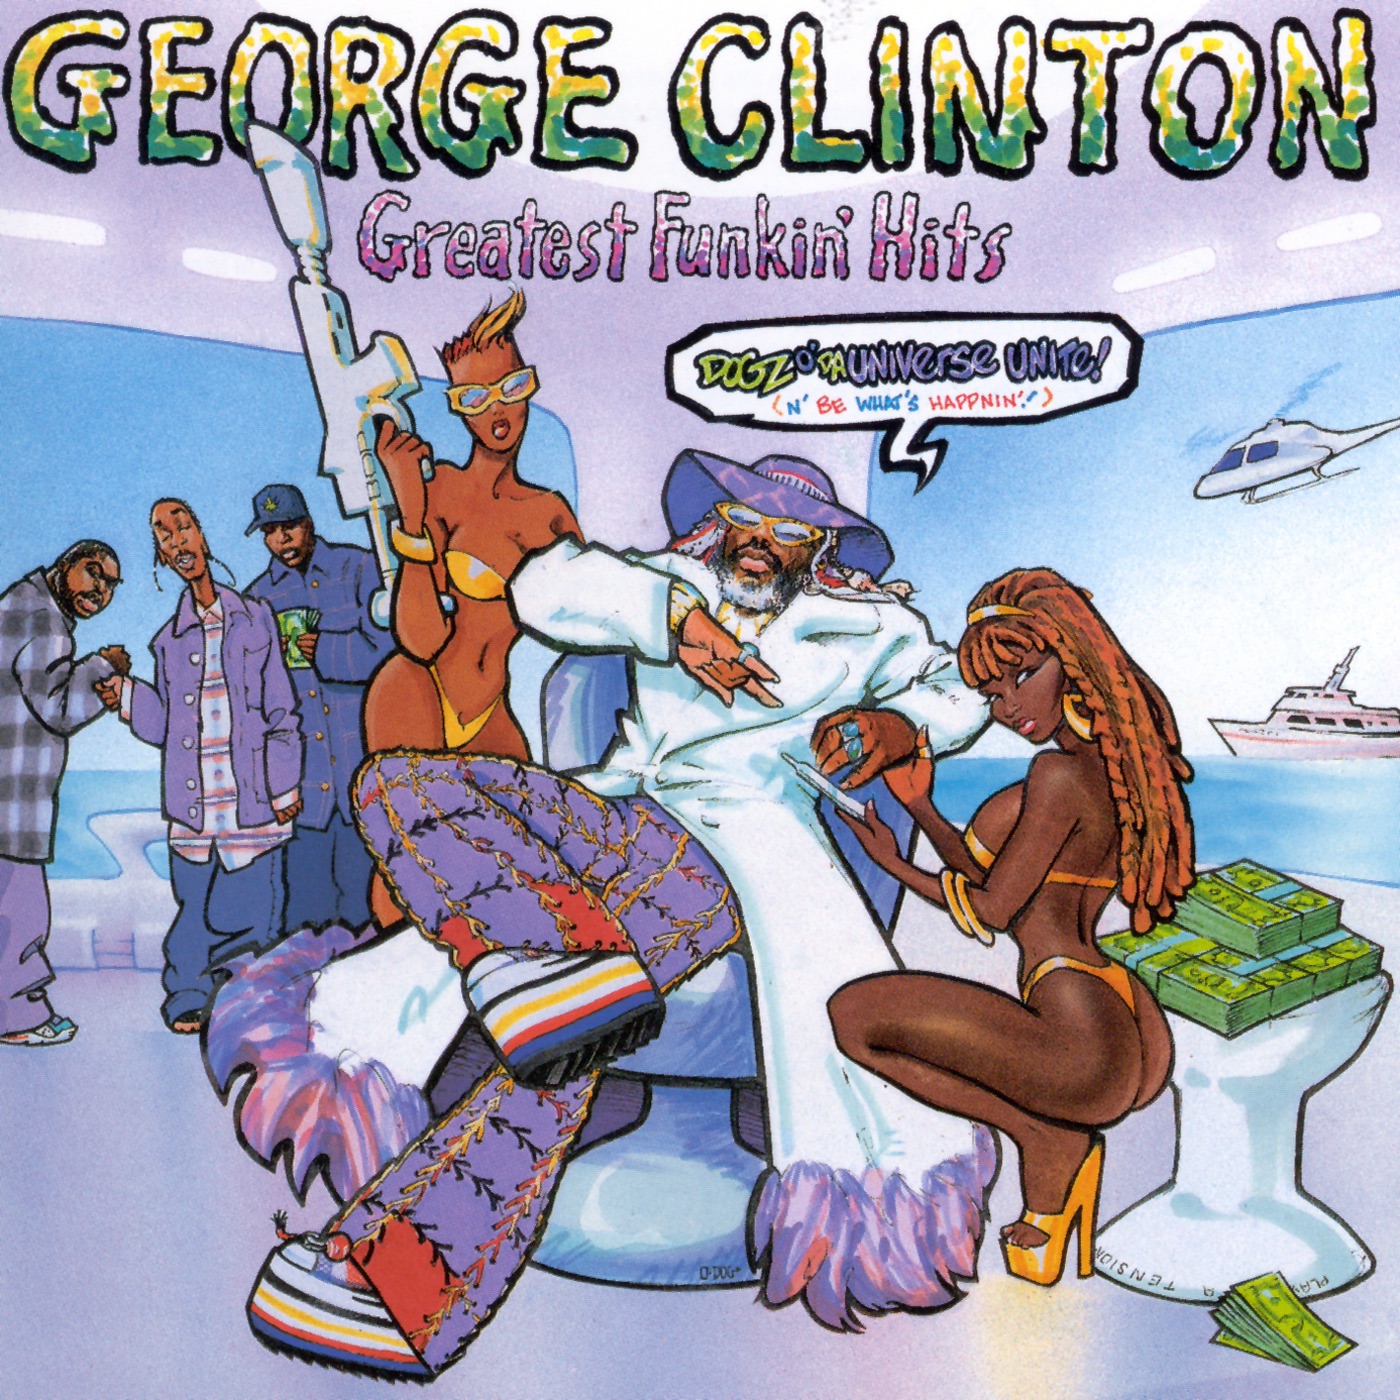 Art for Atomic Dog (Original Extended Version) by George Clinton